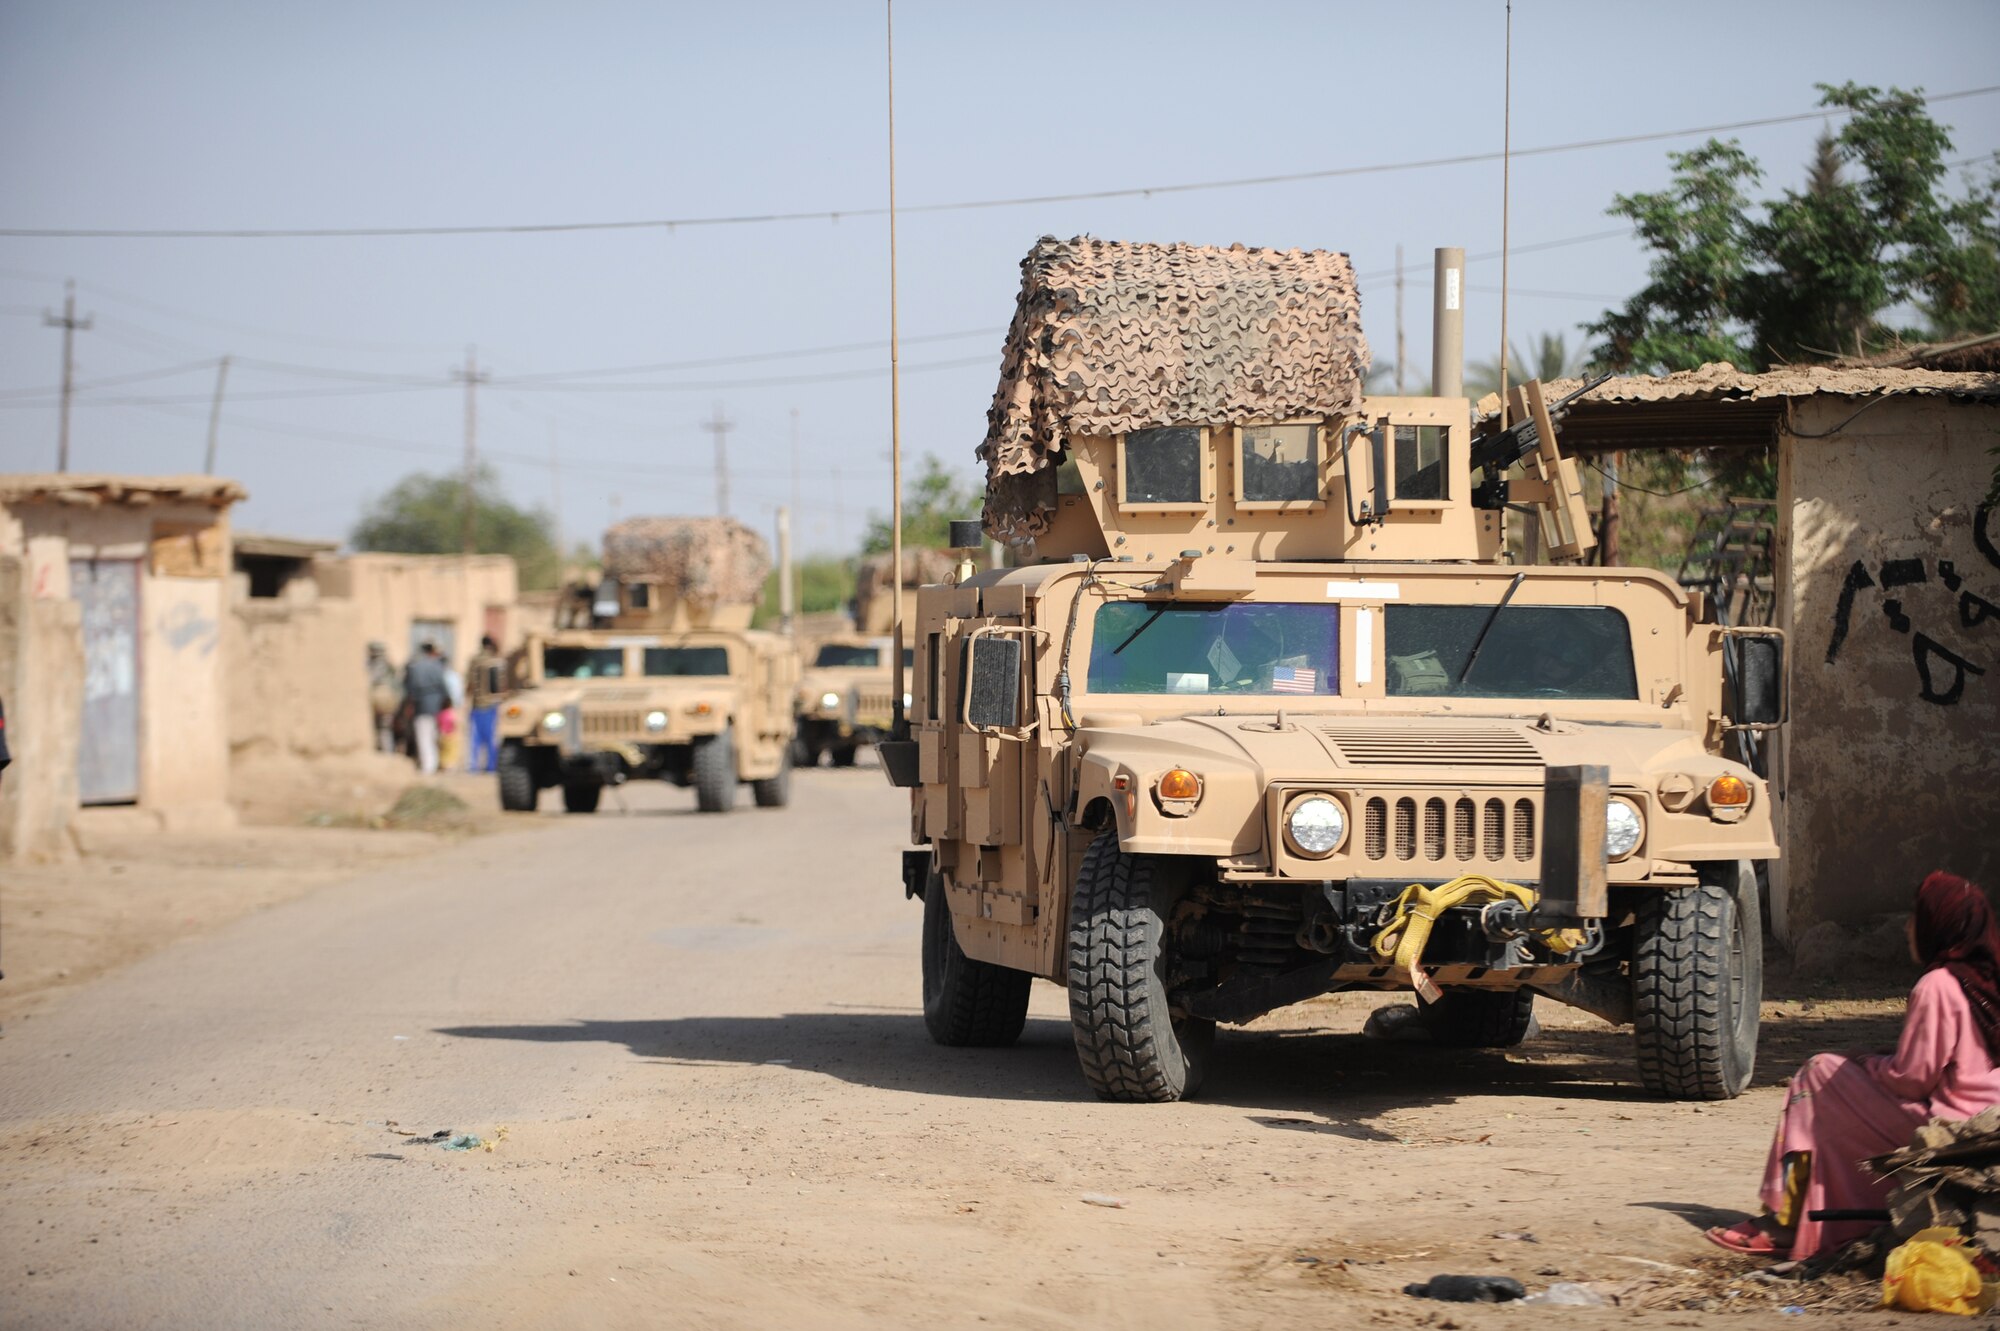 A Humvee patrol from the 532nd Expeditionary Security Forces Squadron at Joint Base Balad, Iraq, conduct security April 9 during a patrol in the village of Abo Atei.  (U.S. Air Force photo/Staff Sgt. James L. Harper Jr.)